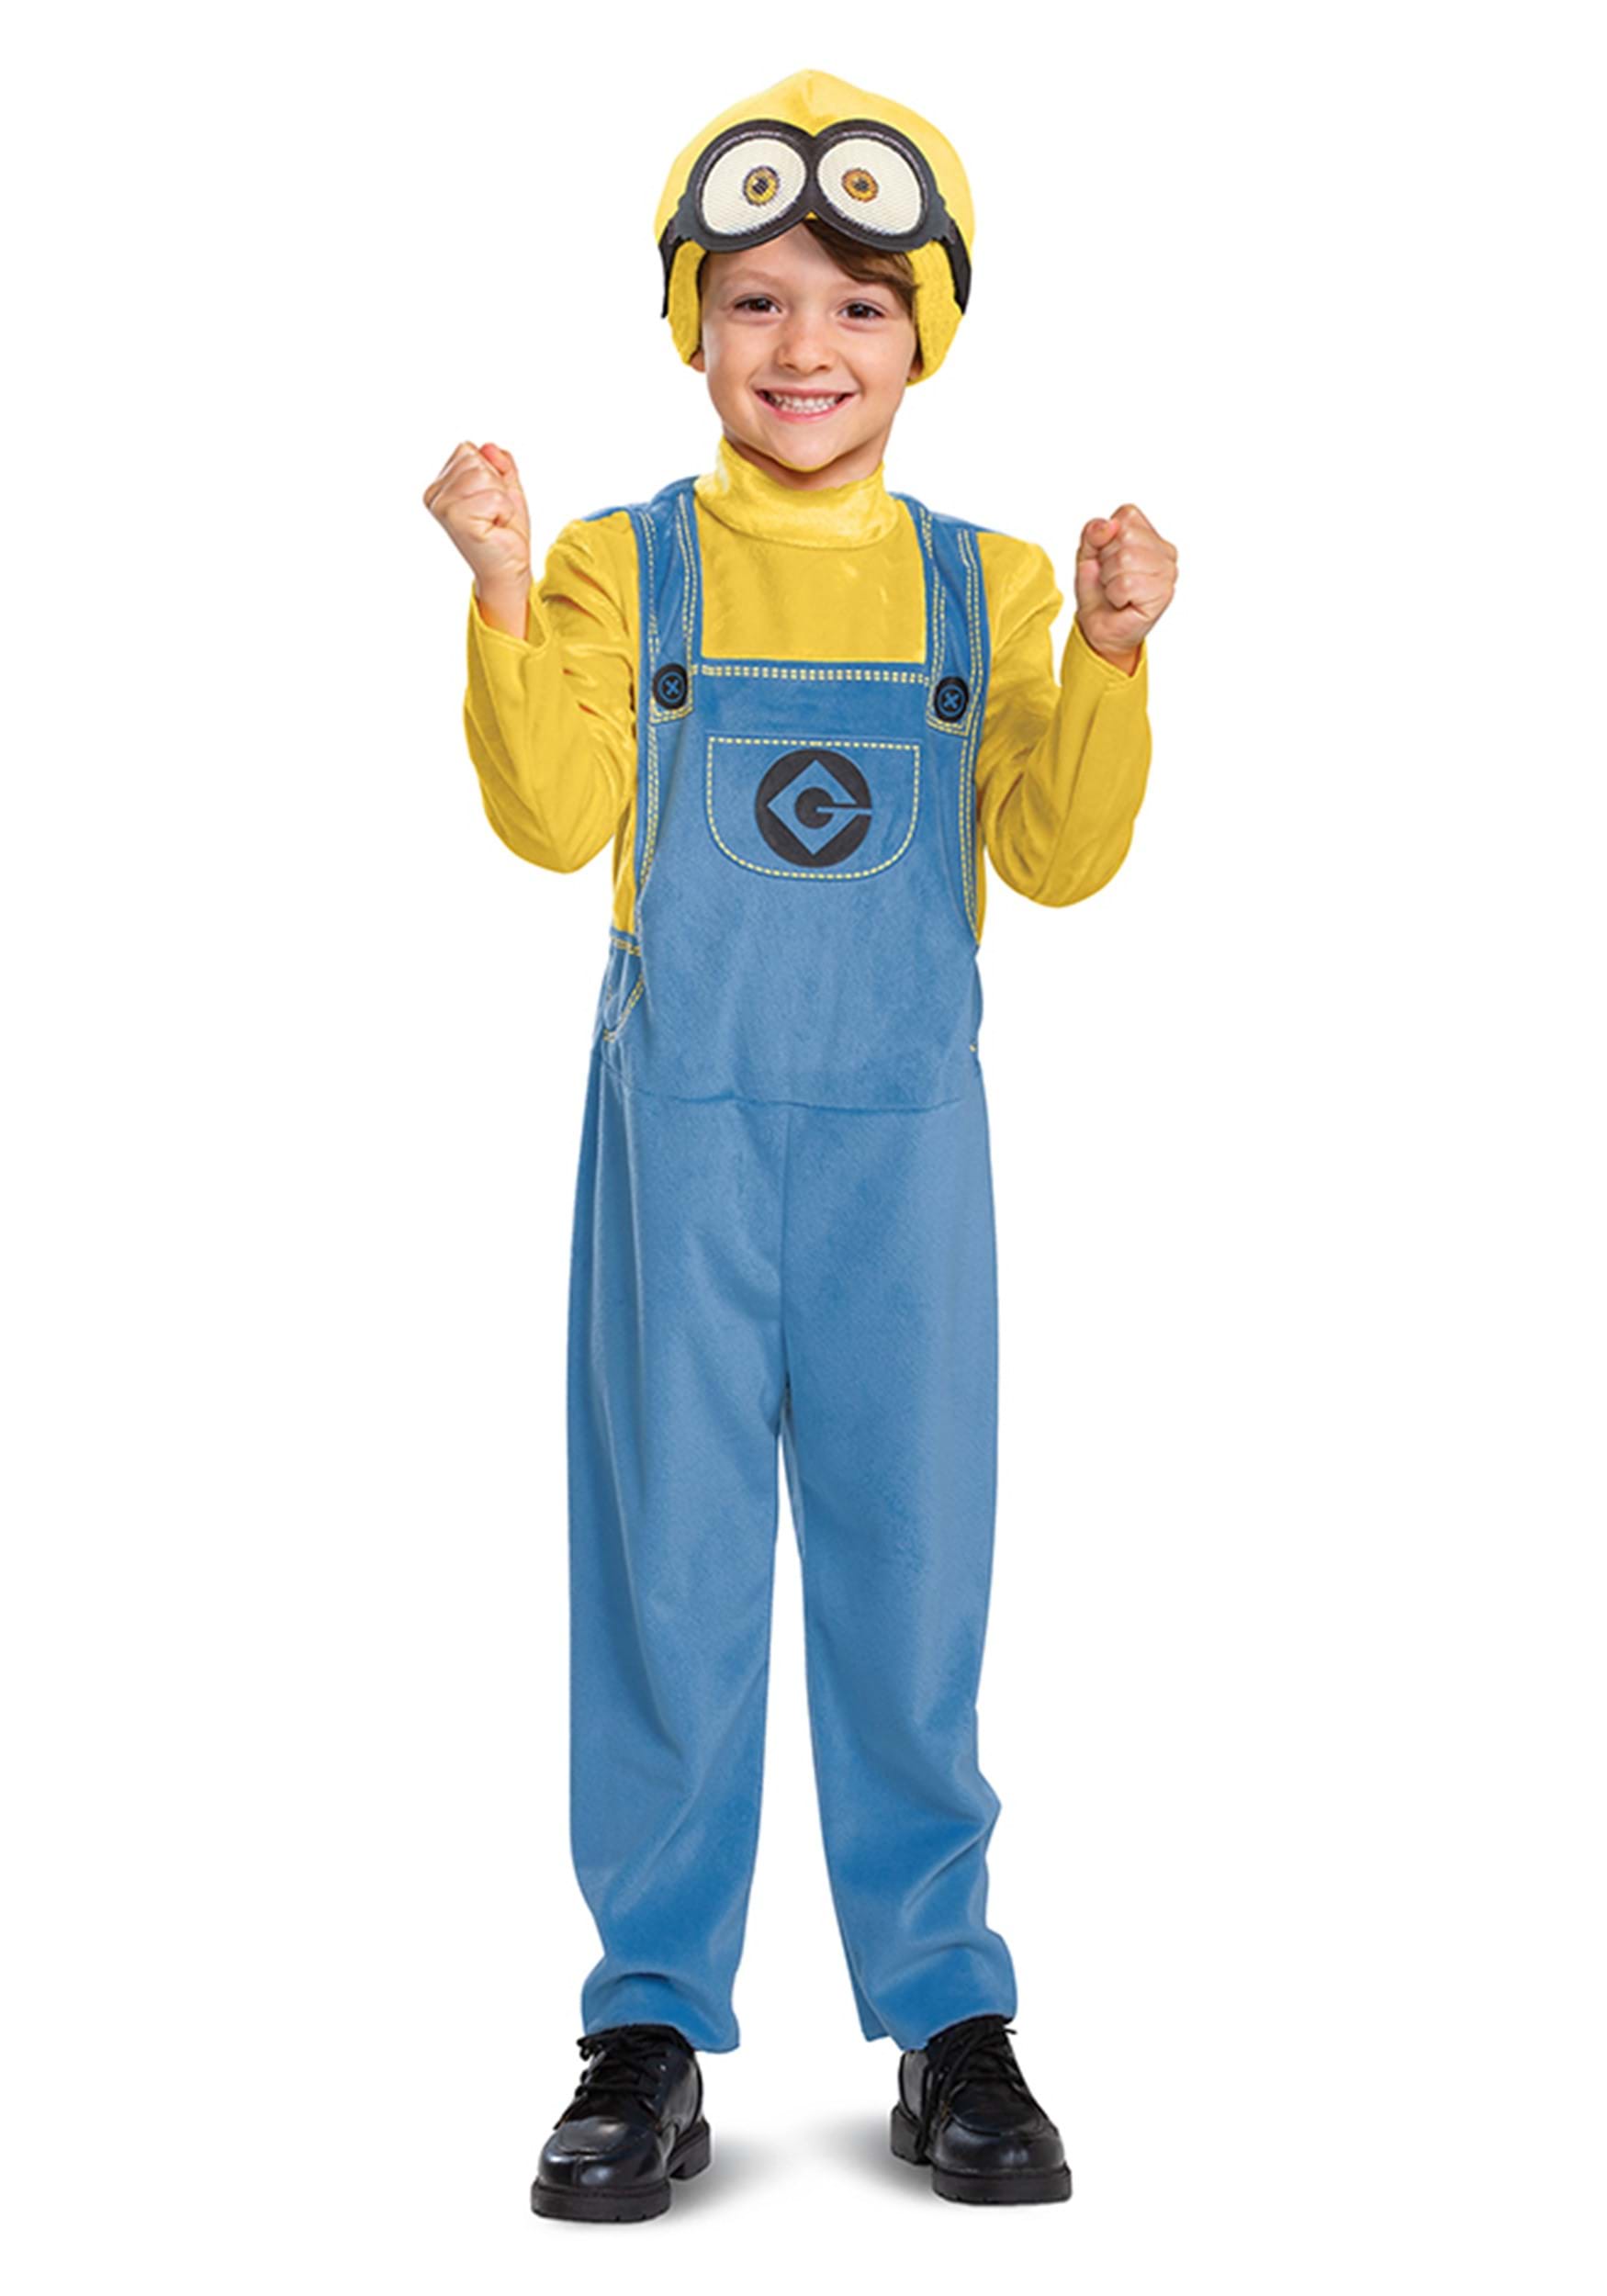 Minion Costume for Toddlers